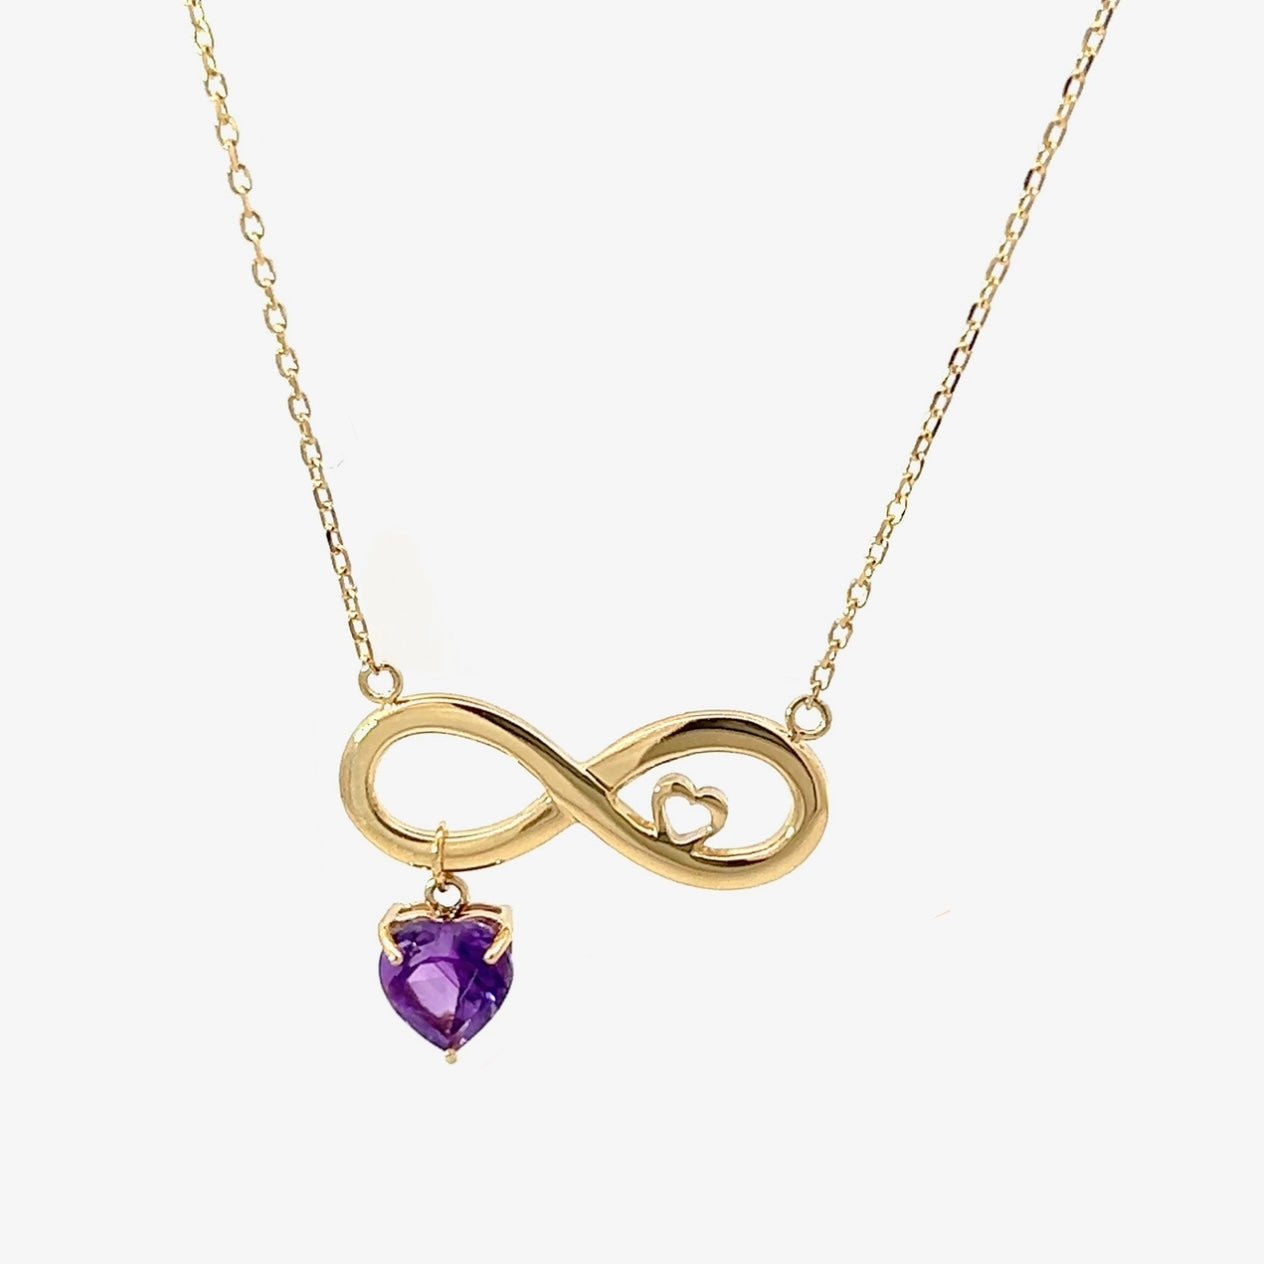 Infinity Heart Necklace in Amethyst - 18k Gold - Ly